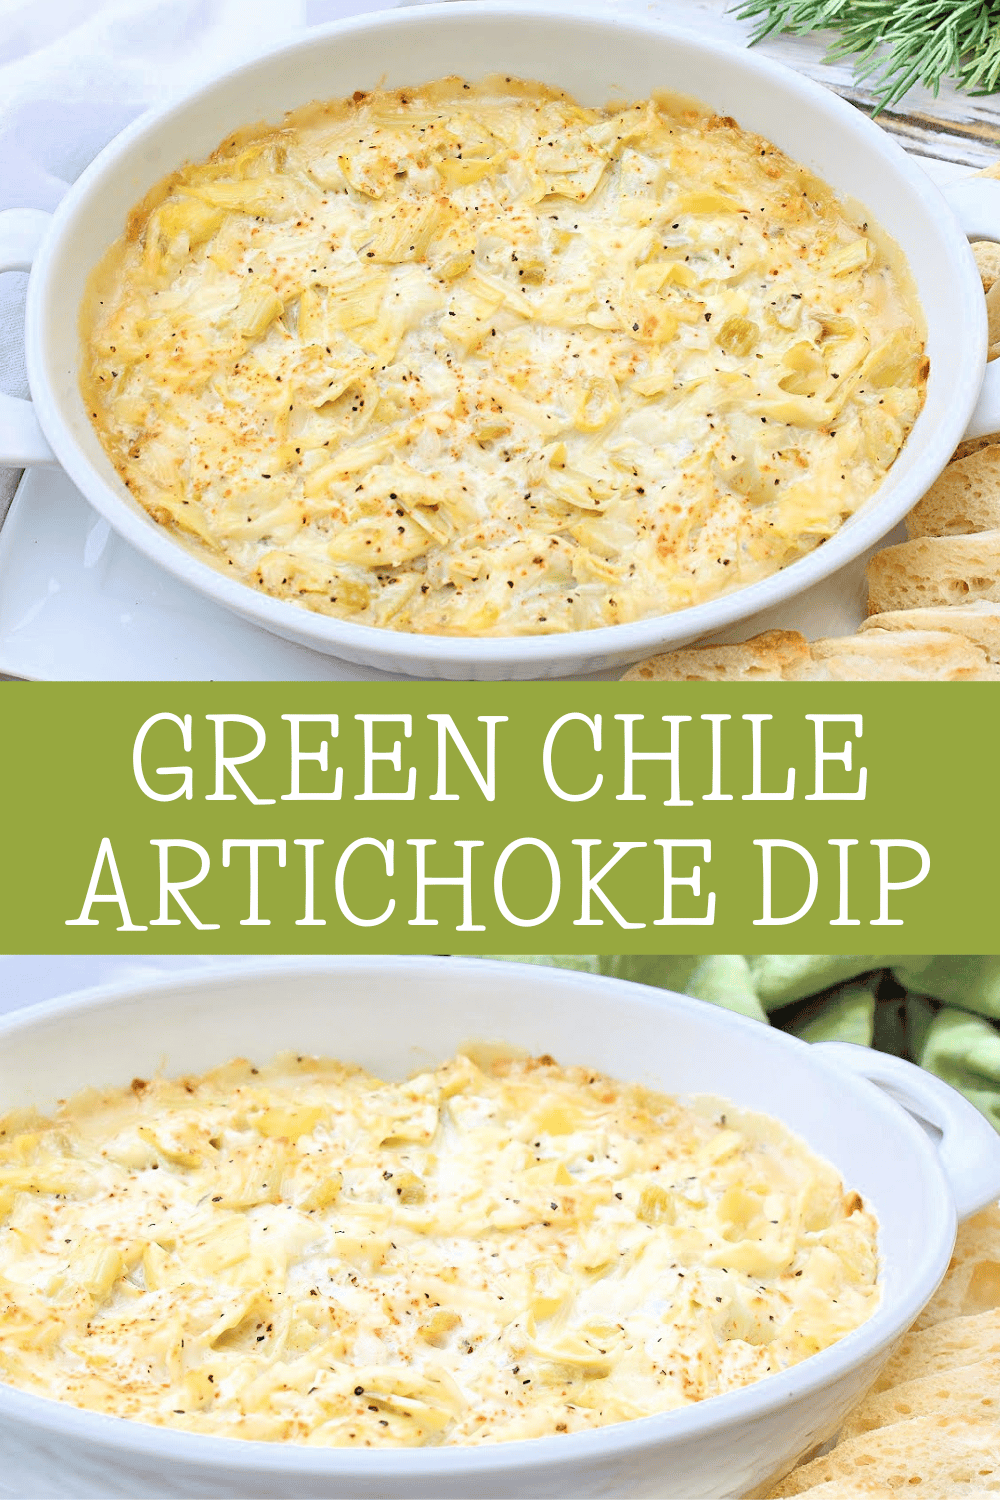 Green Chile Artichoke Dip ~ This classic hot artichoke dip is packed with vibrant, tangy flavors and so easy to make! via @thiswifecooks